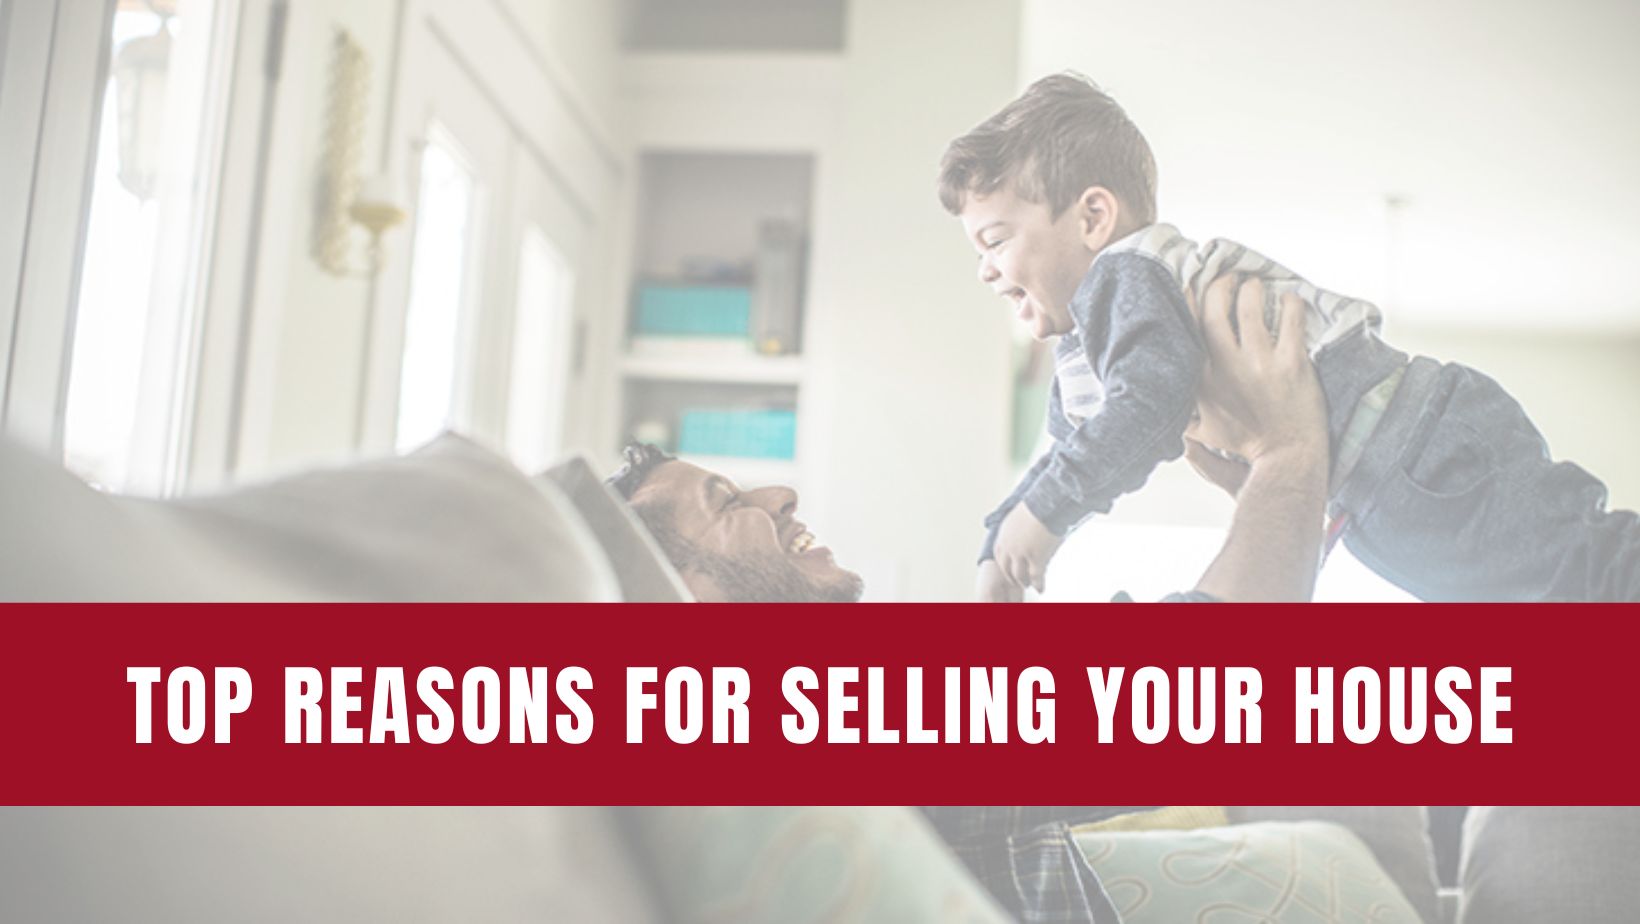 The Top Reasons For Selling Your House